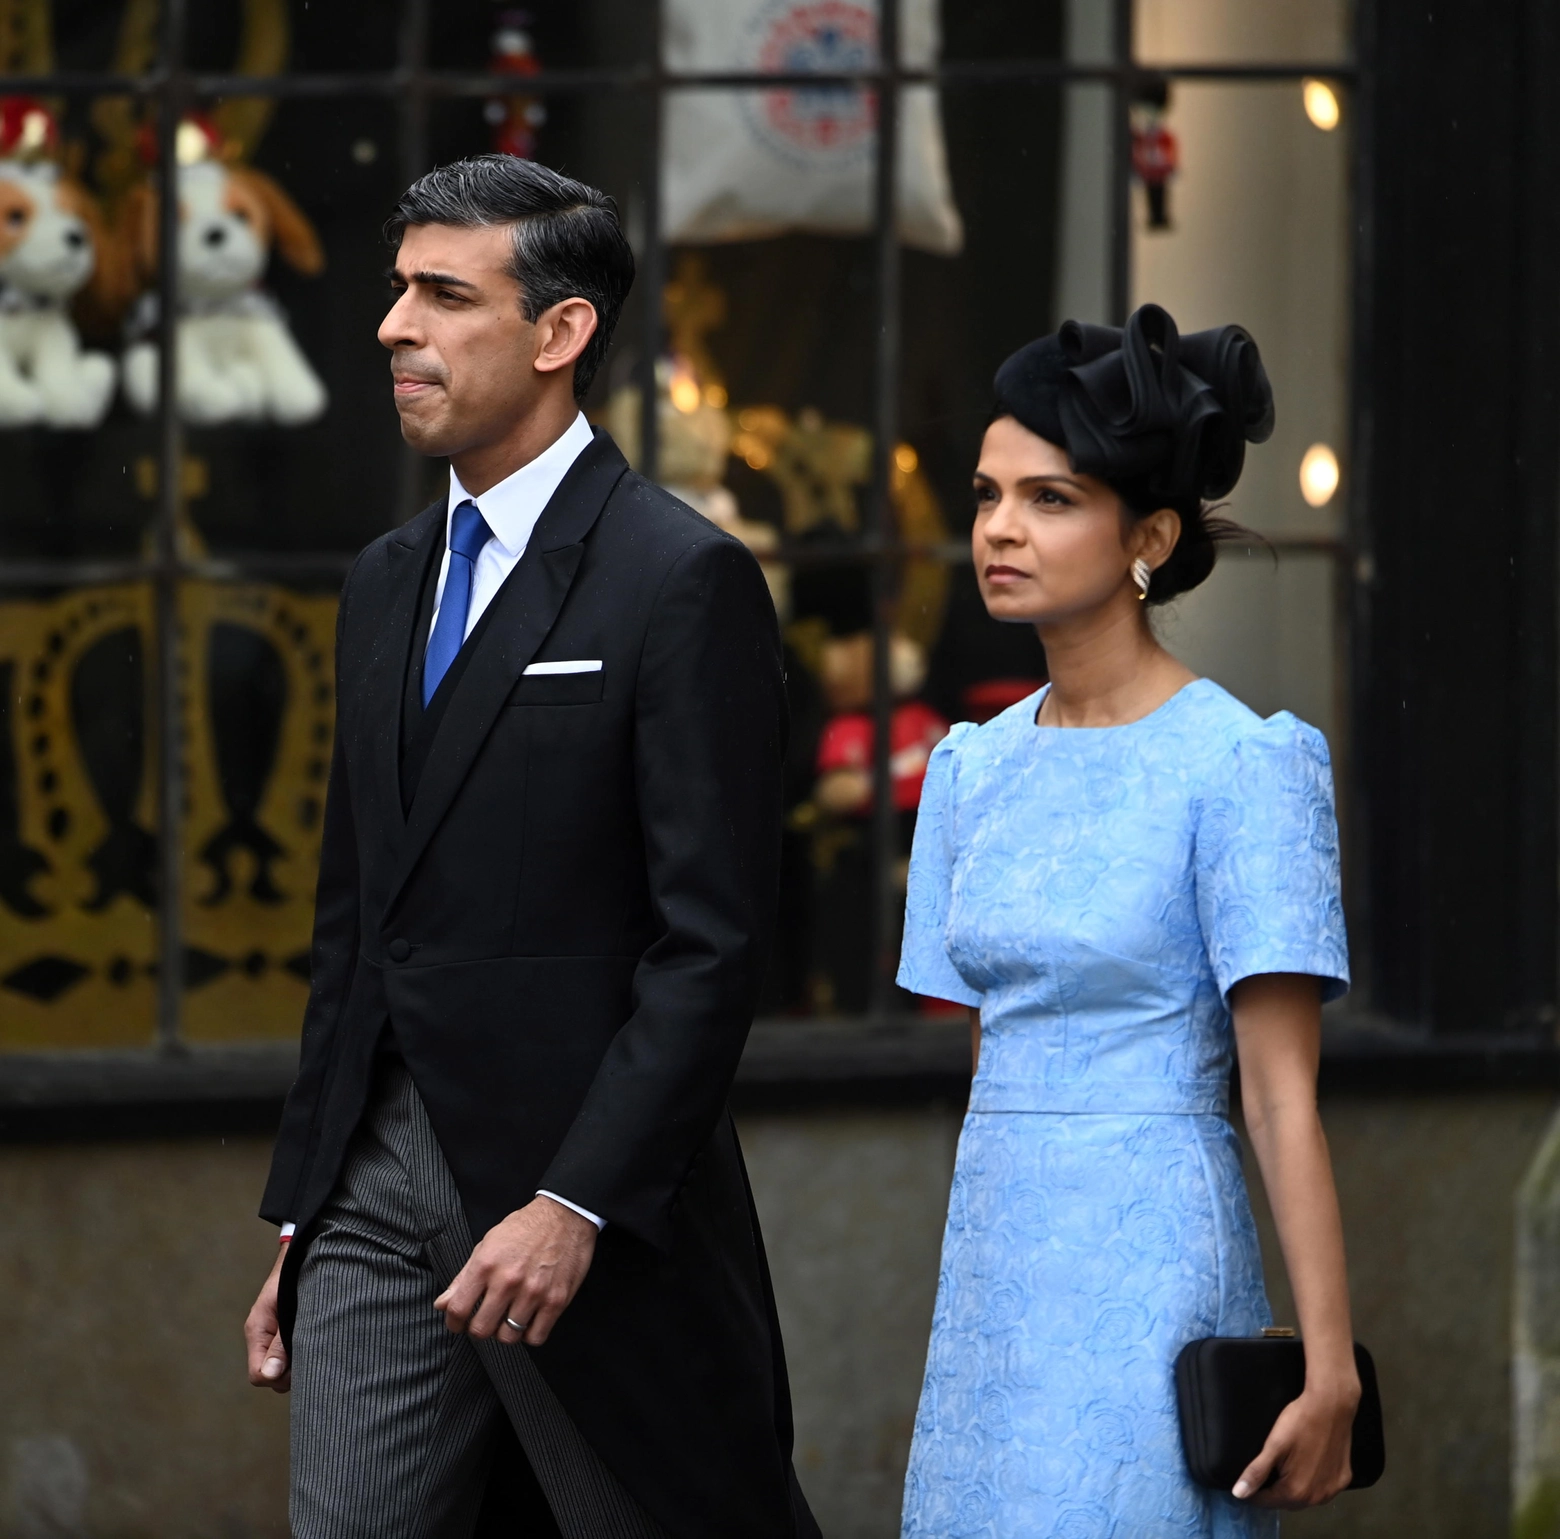 epa10611669 Britain's Prime Minister Rishi Sunak (L) and his wife Akshata Murthy arrive for the Coronation of Britain's King Charles III and Queen Camilla at Westminster Abbey in London, Britain, 06 May 2023. Coronations of British Kings and Queens have taken place at Westminster Abbey for the last 900 years. The service will be attended by around 100 heads of state from around the world.  EPA/Andy Rain